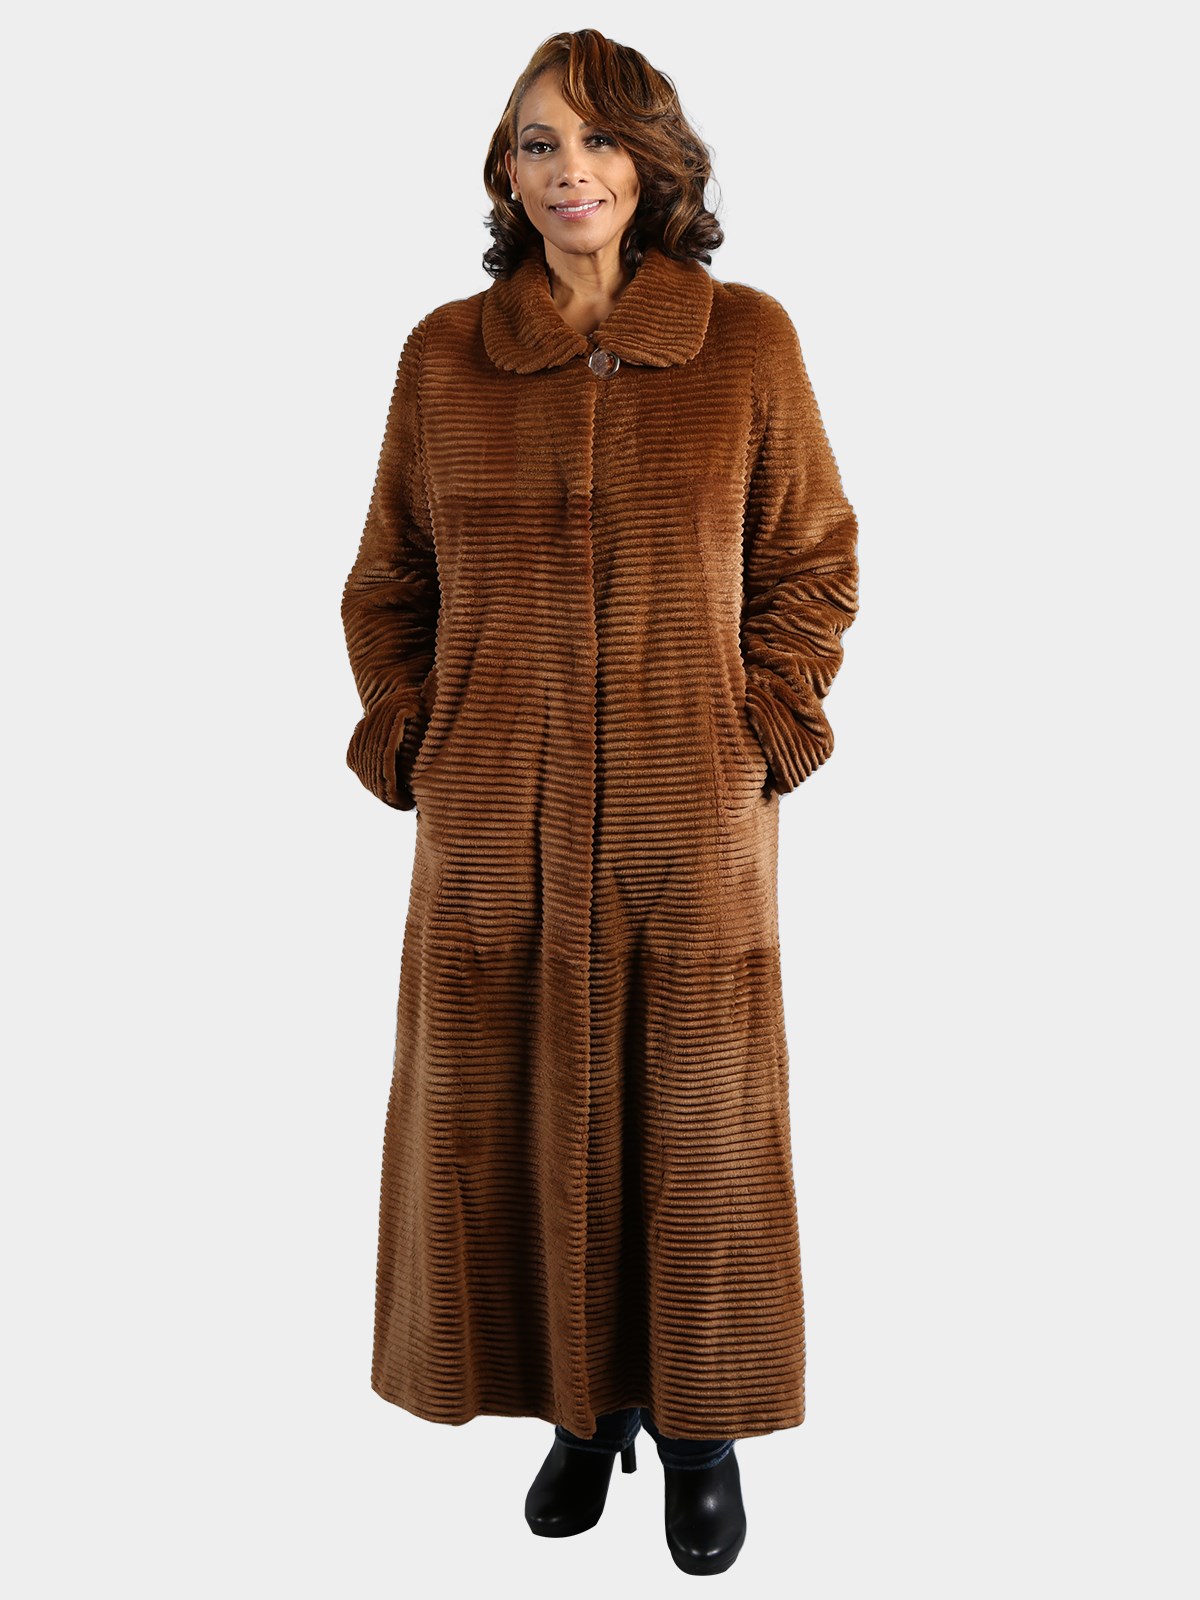 Woman's Sugar Brown Sheared Mink Fur Coat with Laser Grooving